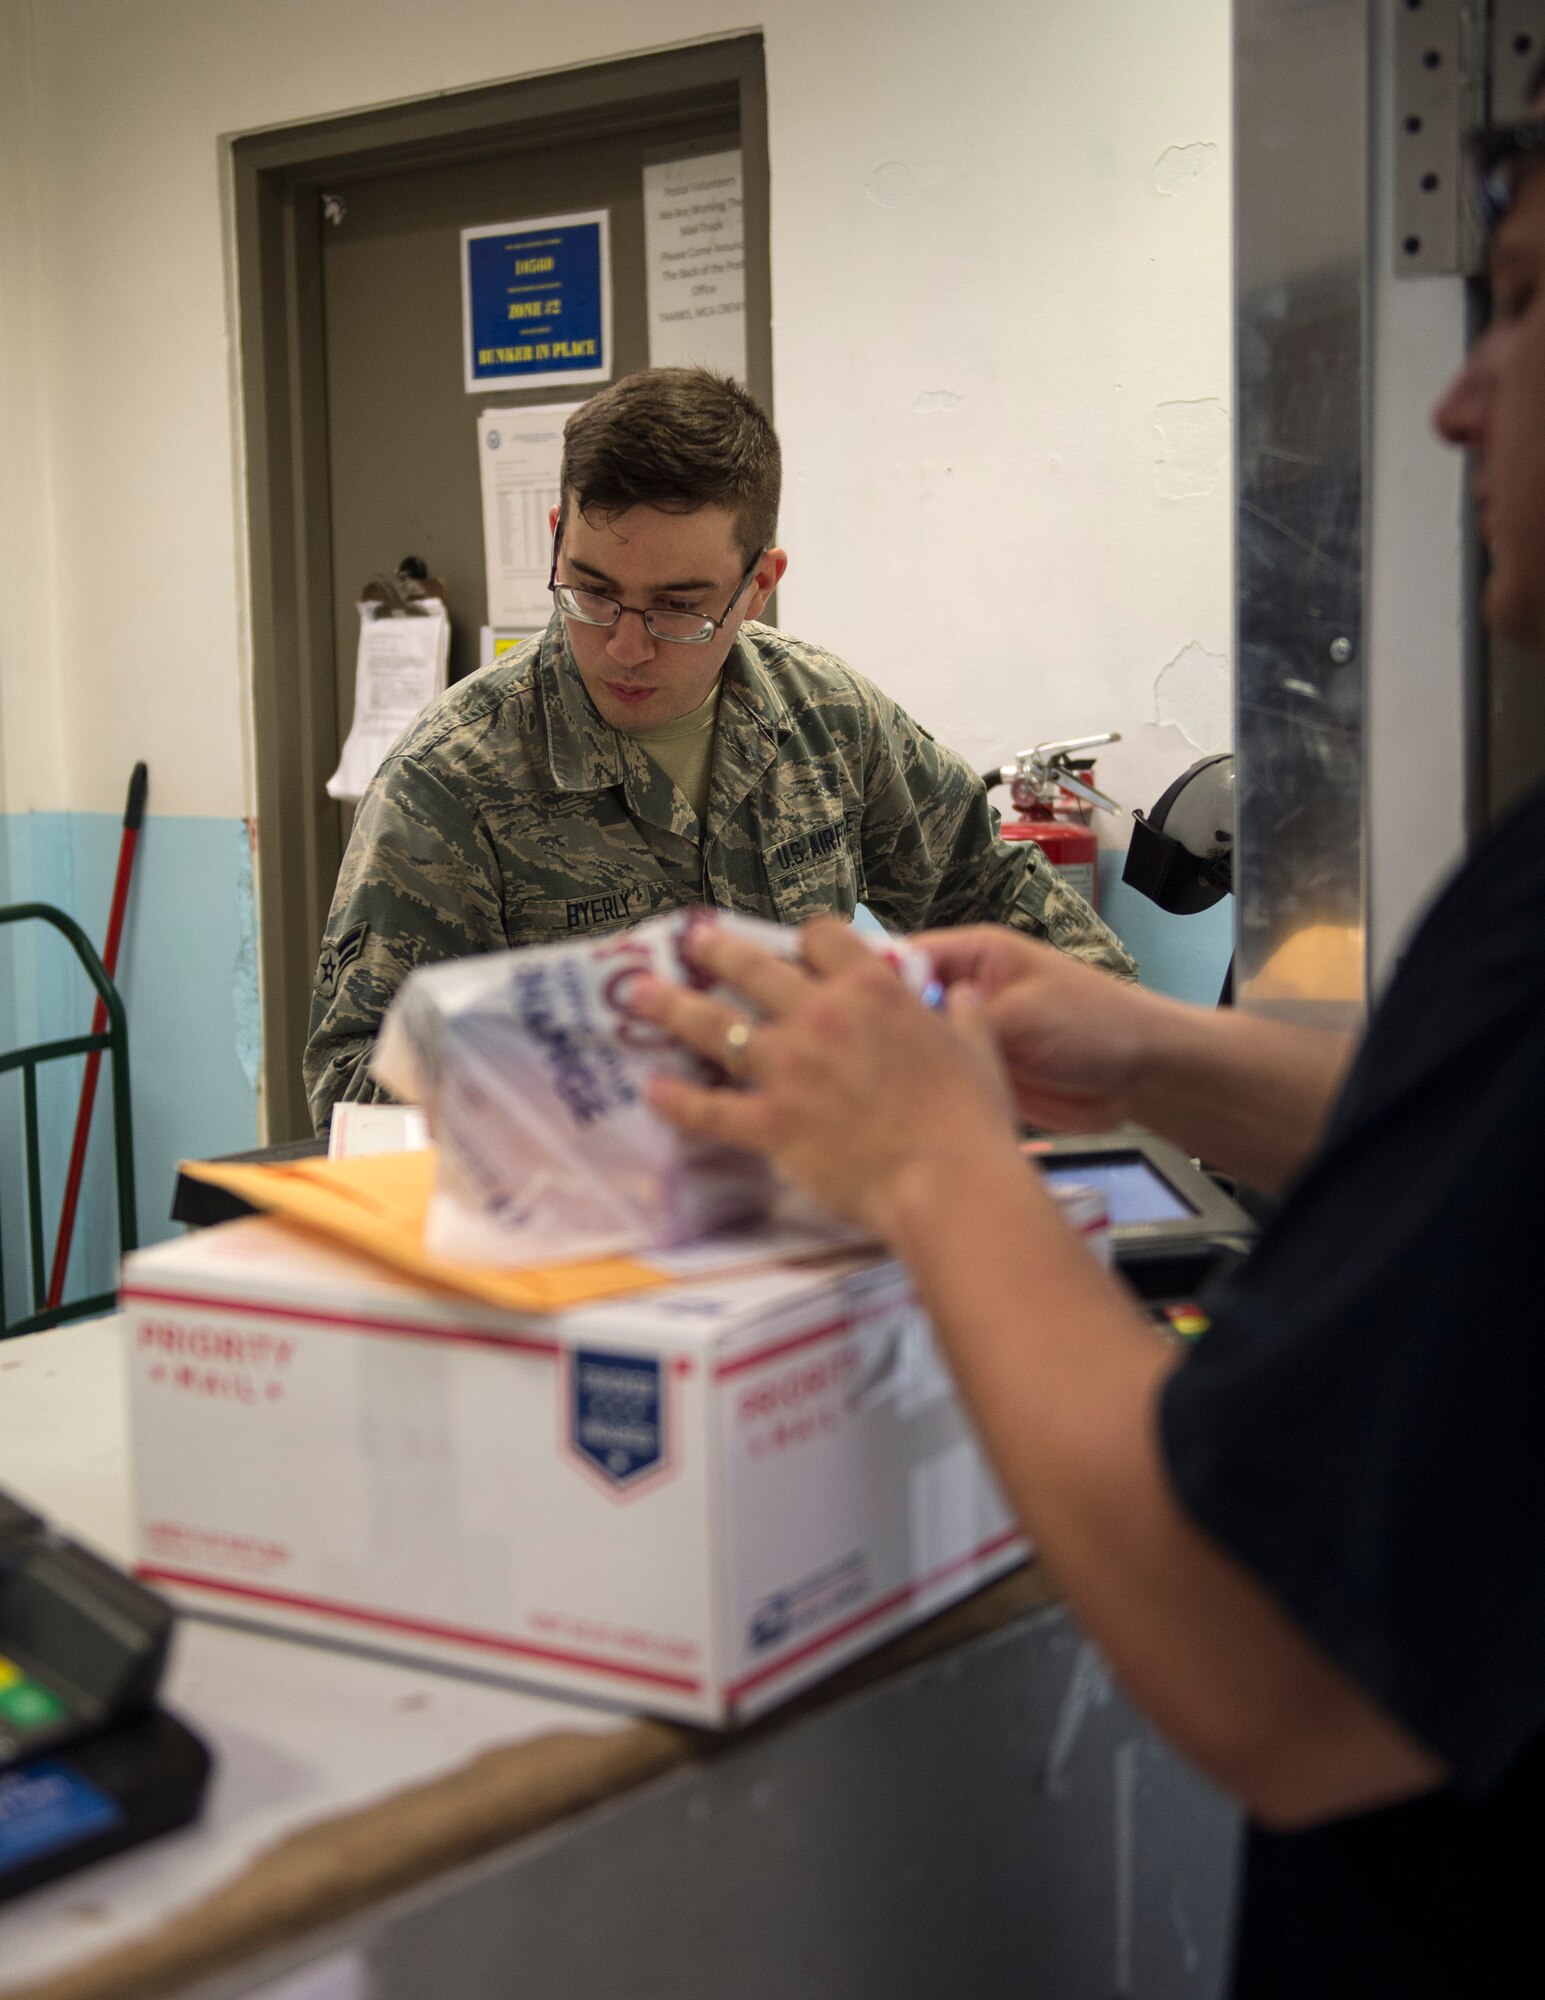 U.S. Air Force Airman 1st Class Stephen Byerly, a finance clerk with the 379th Expeditionary Communication Squadron, enters customer information into a computer at Al Udeid Air Base, Qatar, July 14, 2017.